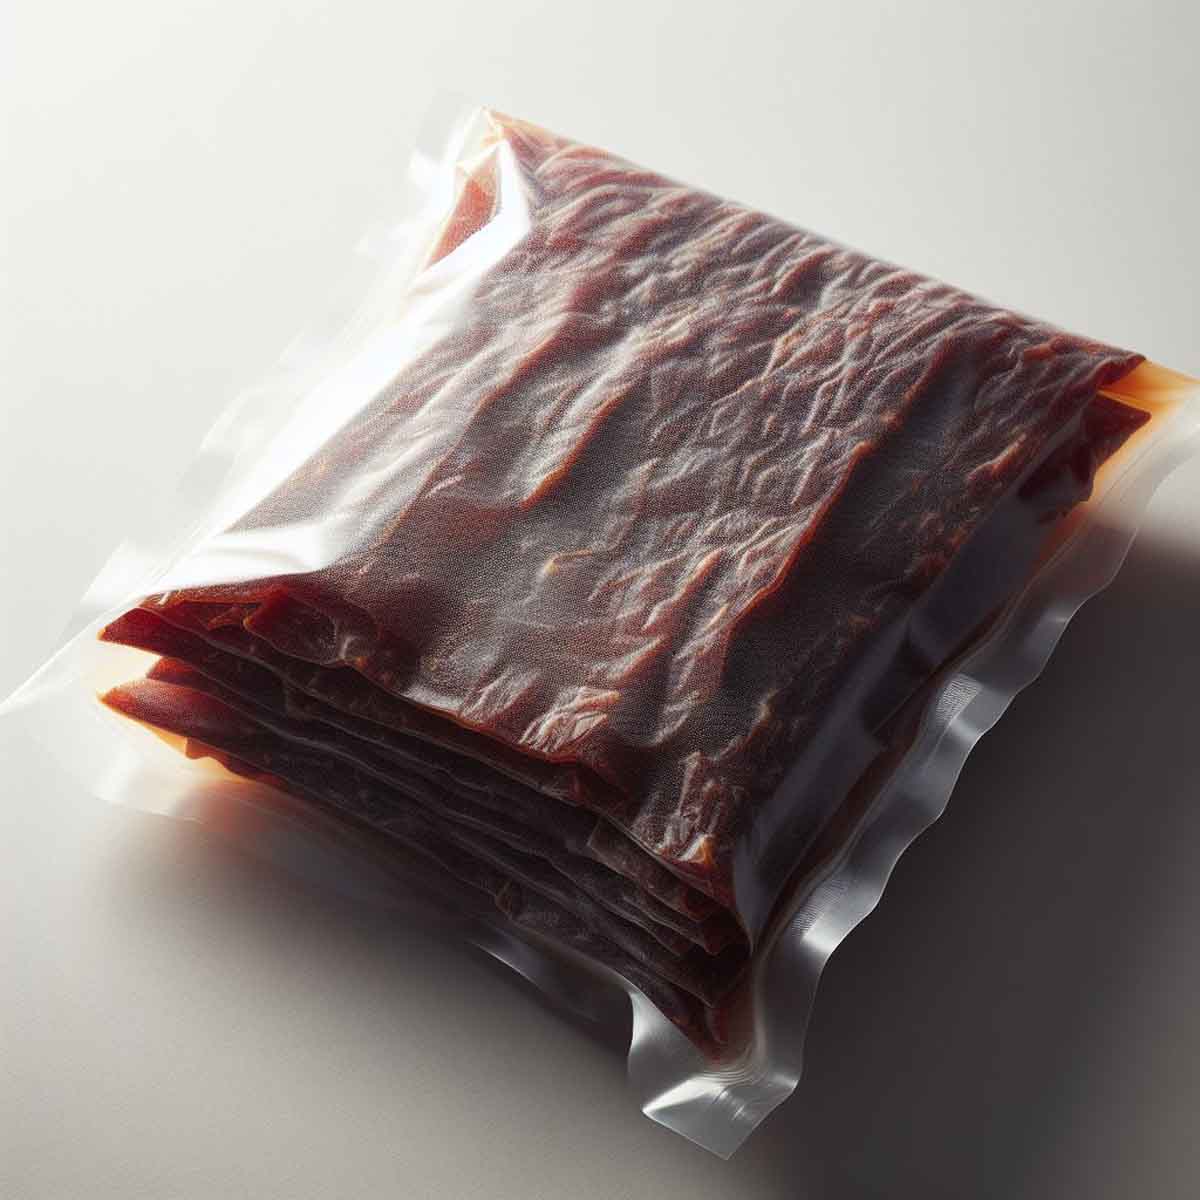 Vacuum-sealed bags of beef jerky highlighting its preserved texture and color.